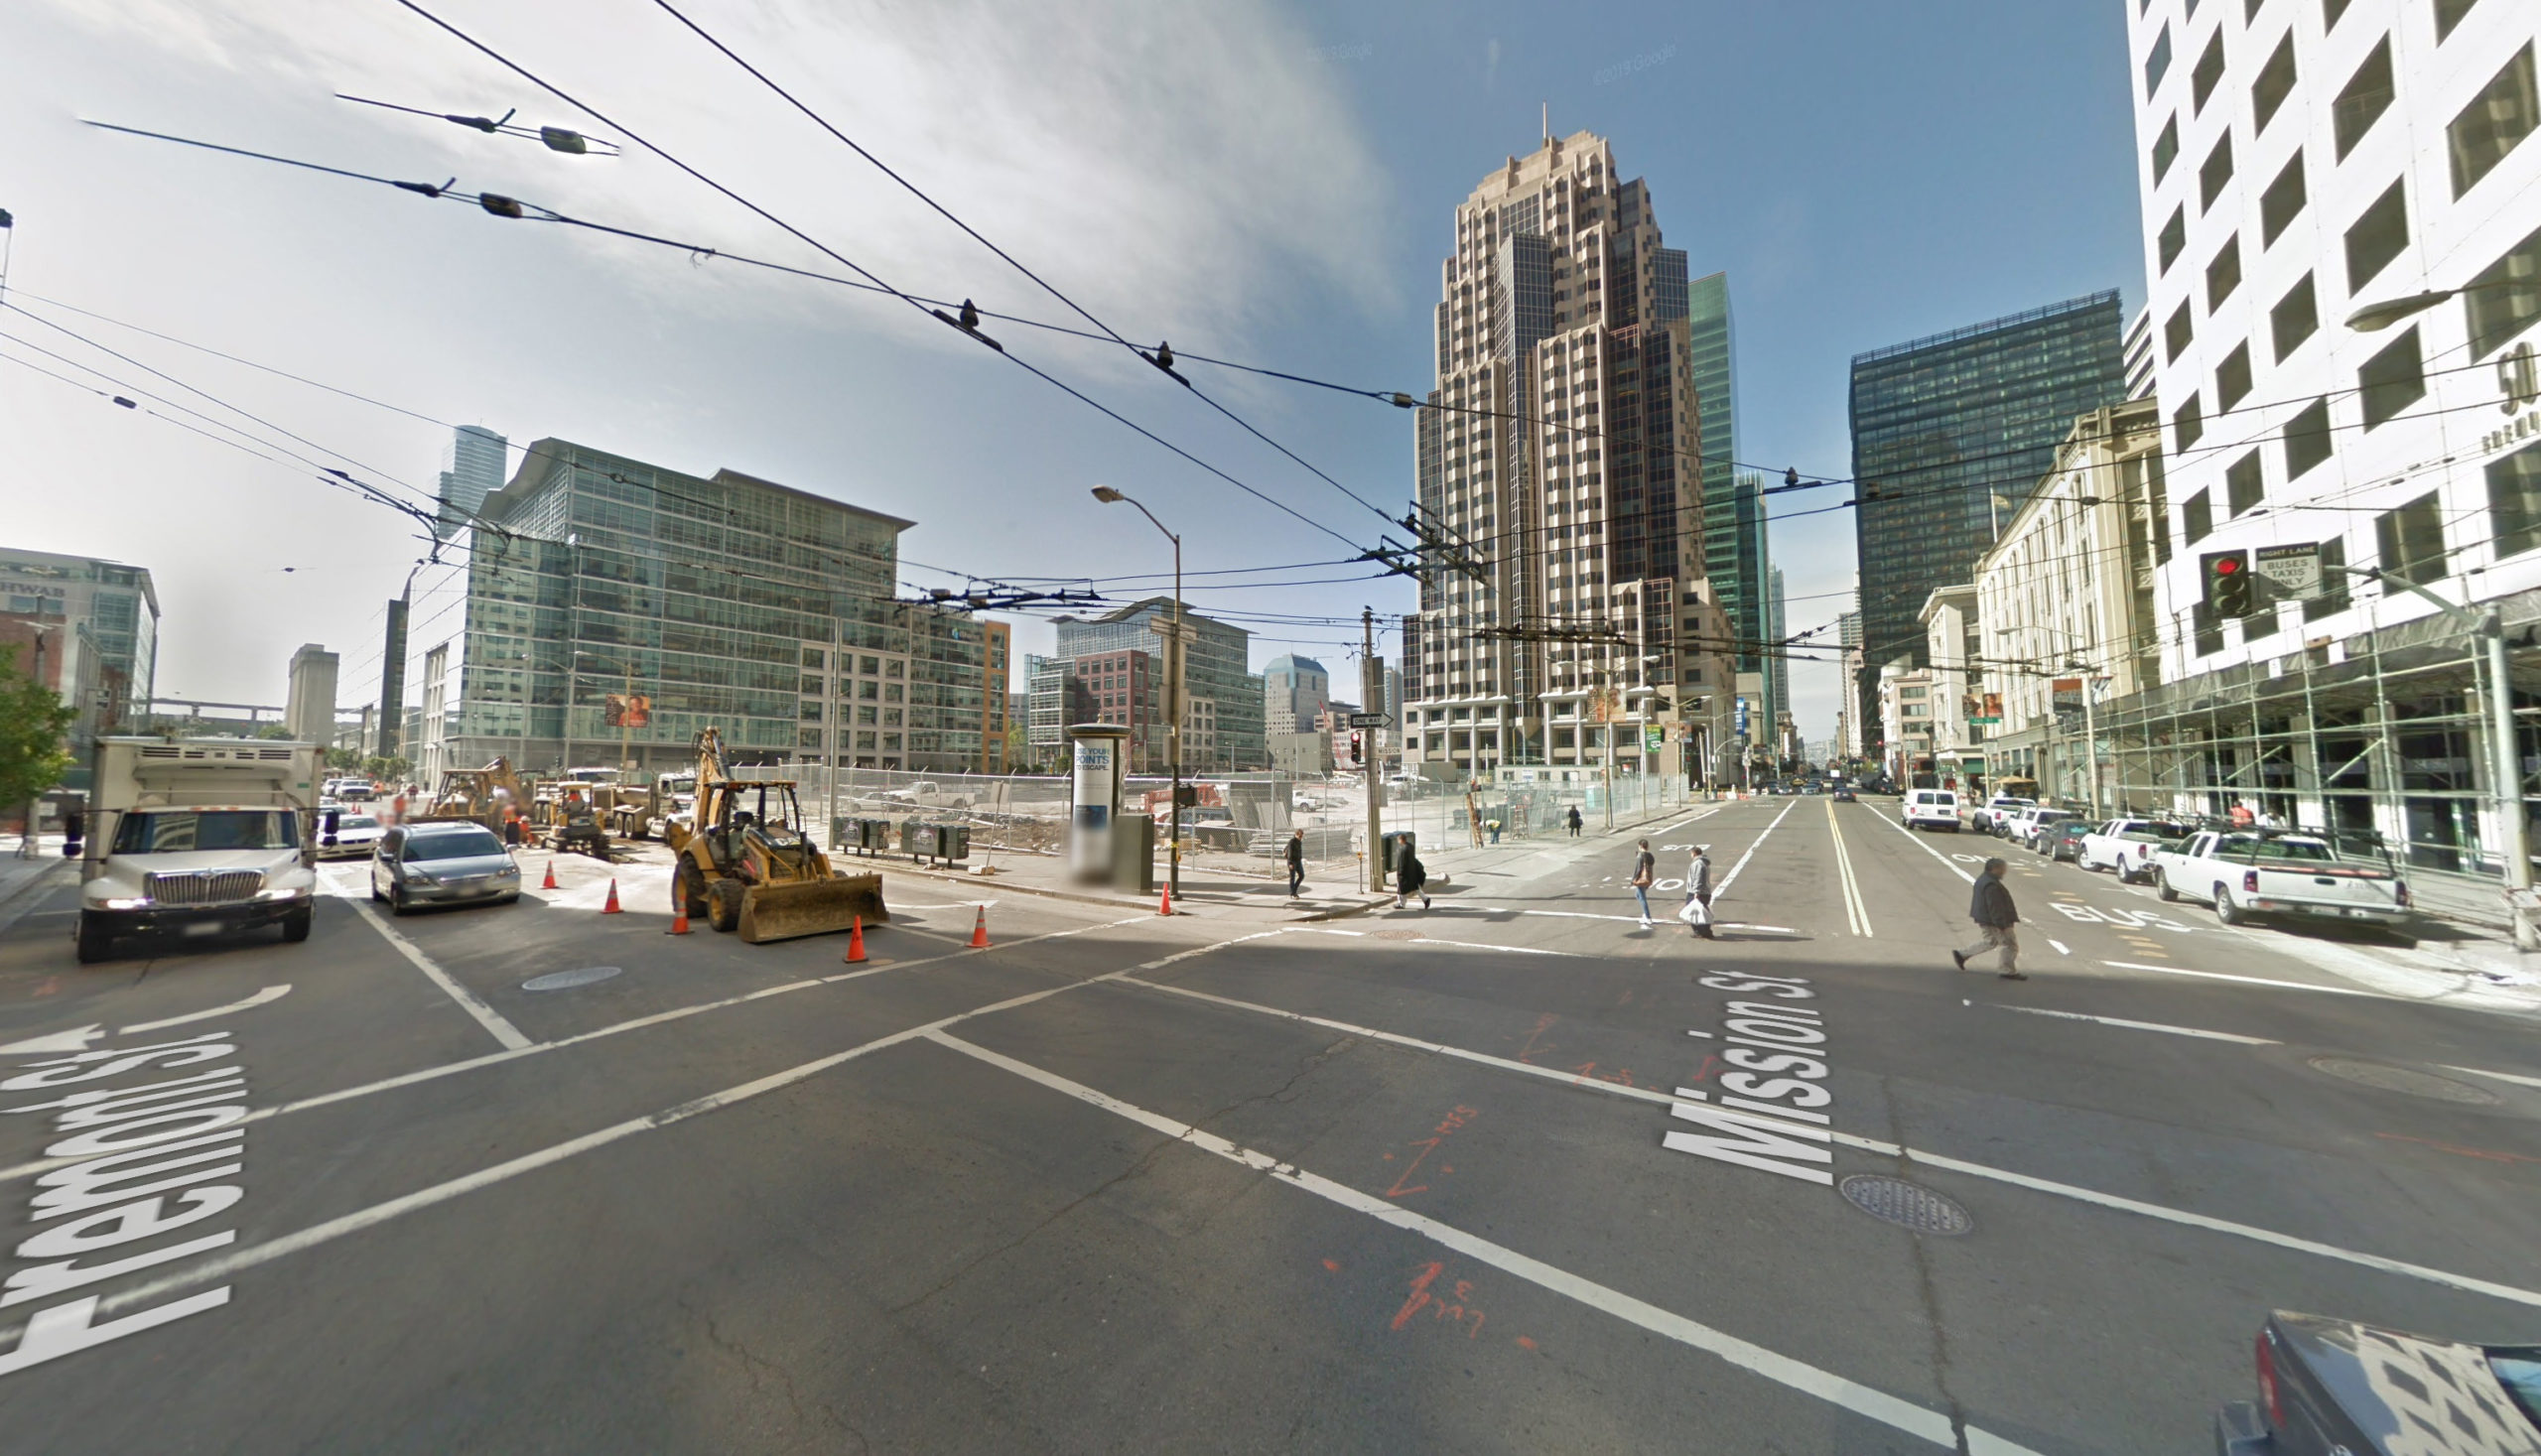 Future site of the Salesforce Tower circa 2011, image courtesy Google Street View